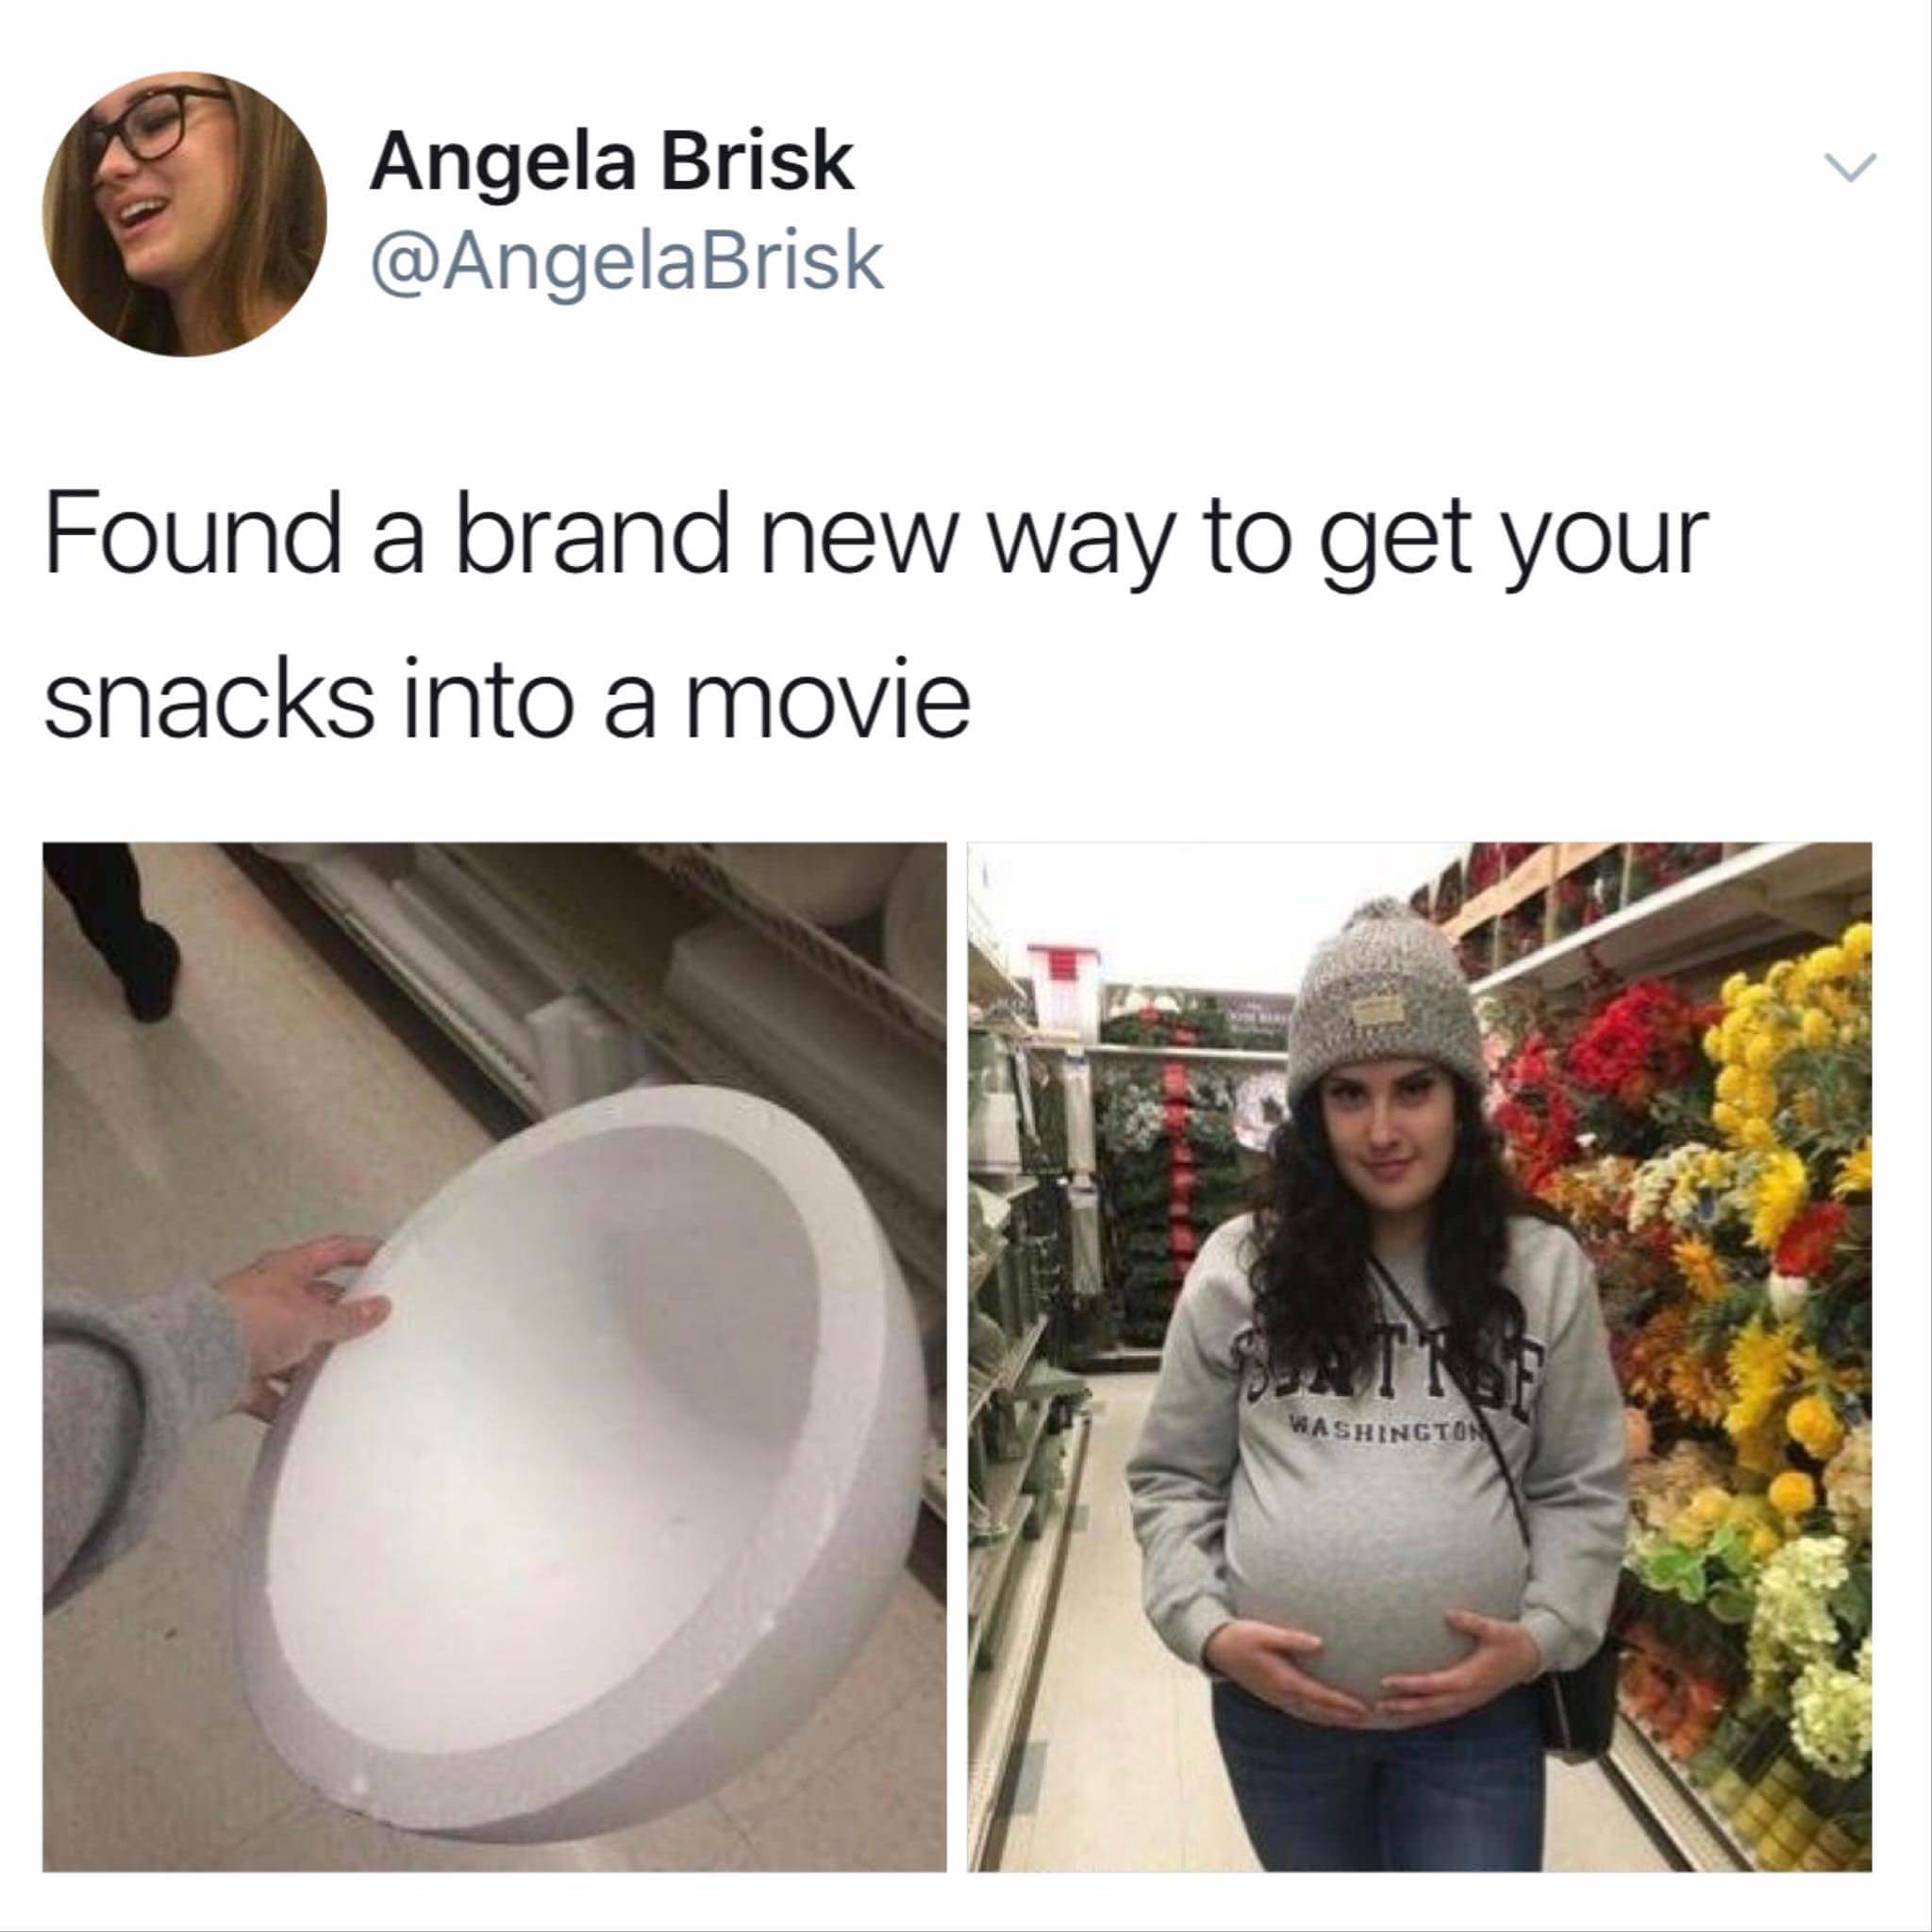 sneaking snacks into movies pregnant - Angela Brisk Found a brand new way to get your snacks into a movie Washington